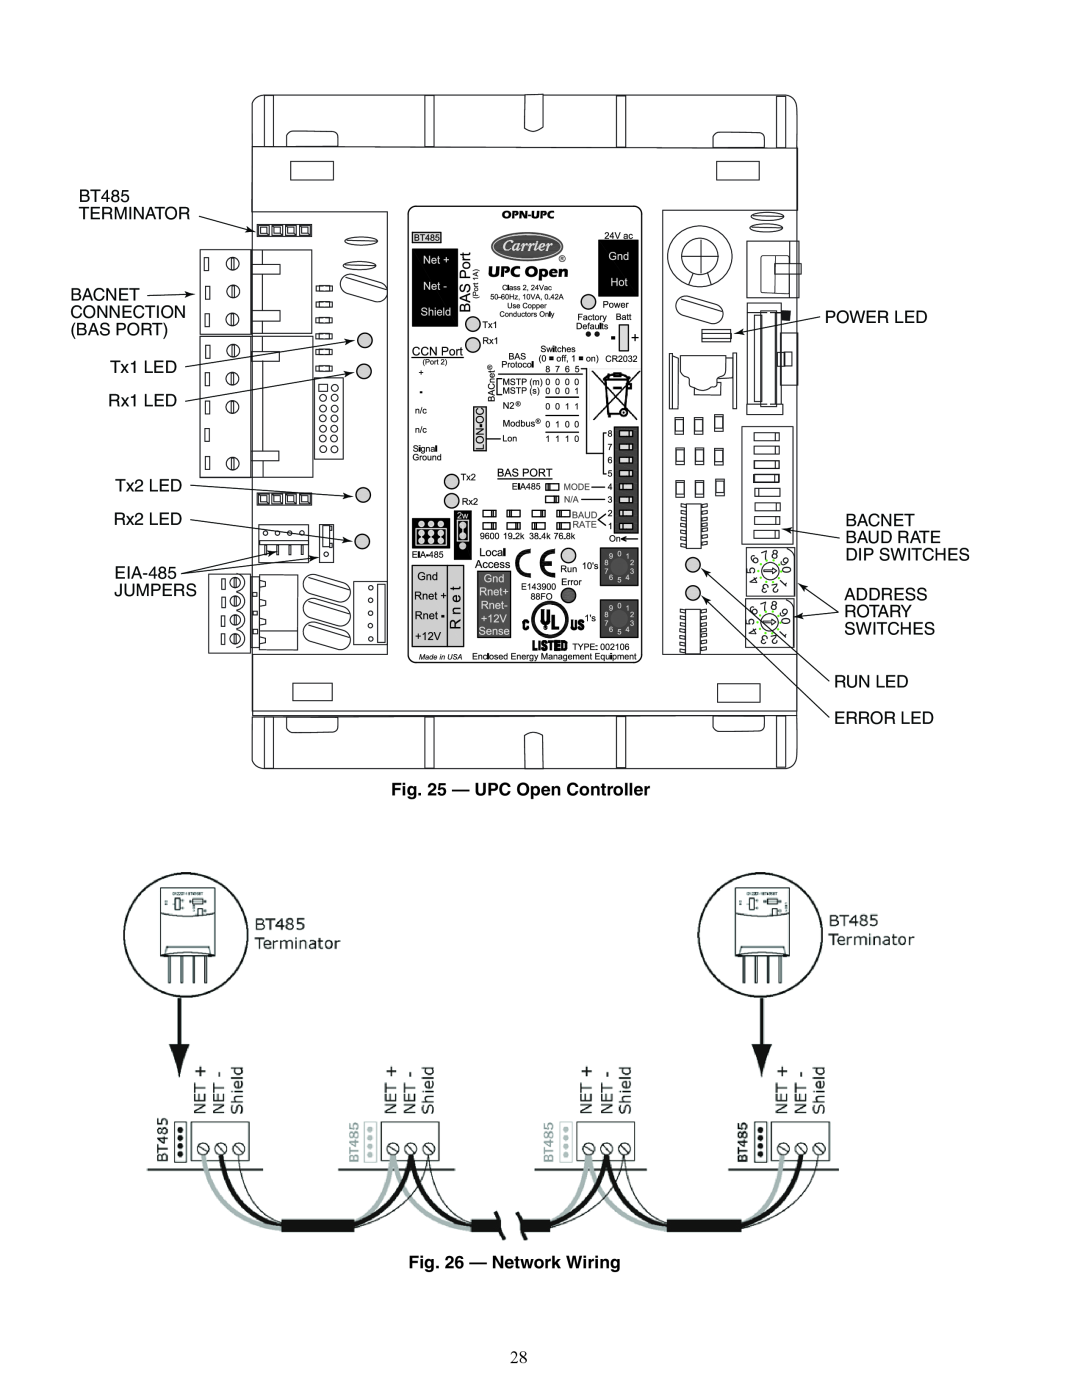 Carrier 62E specifications UPC Open Controller, Network Wiring 